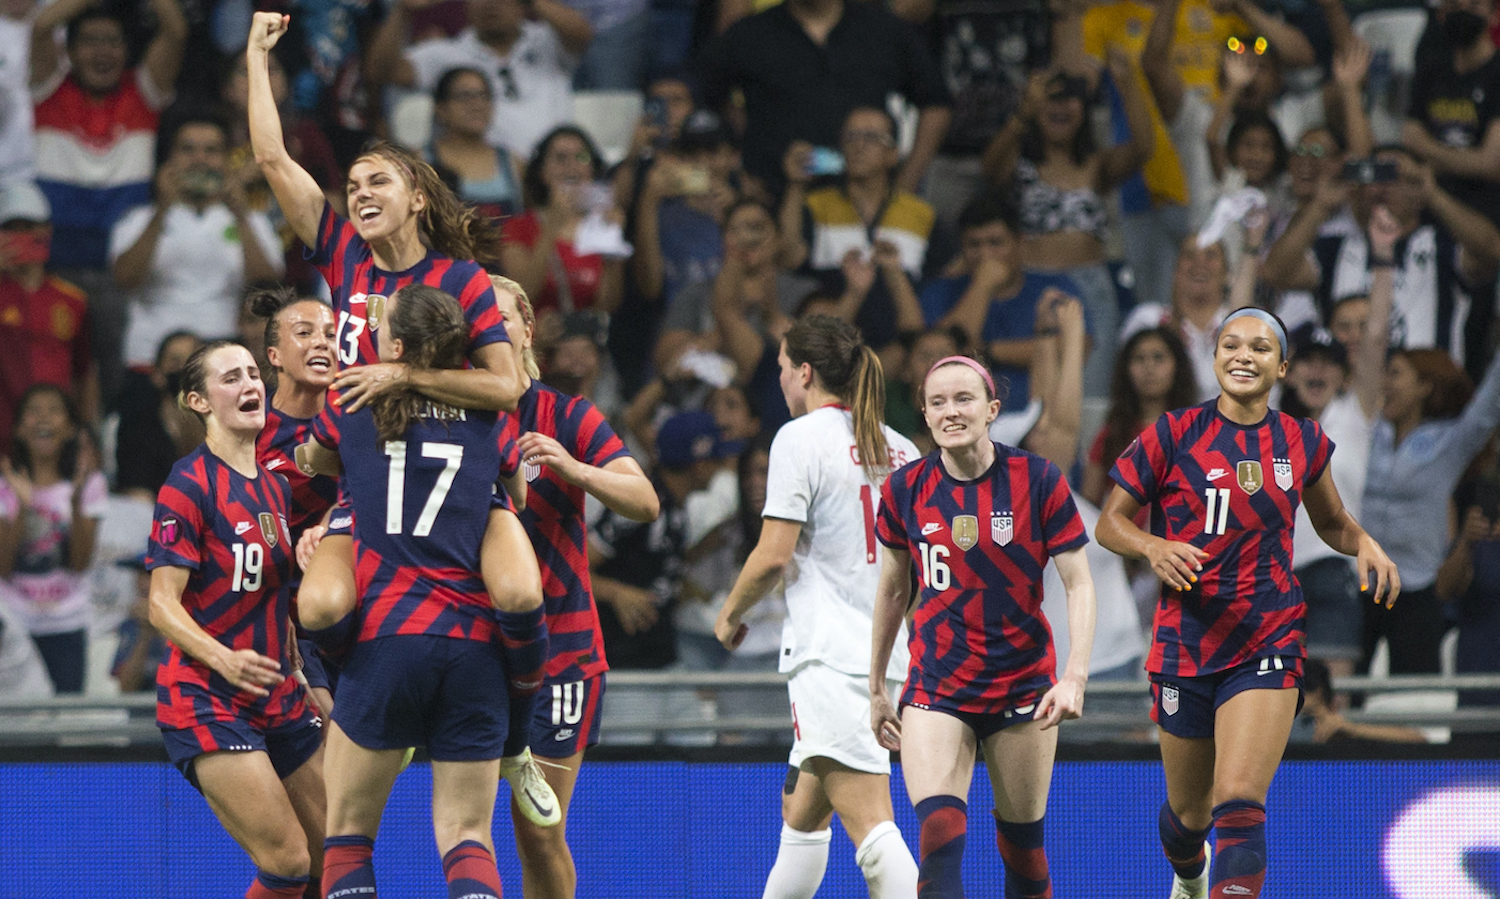 USA's Alex Morgan (top) celebrates with teammates after scoring against Canada during their 2022 Concacaf women's championship final football match, at the BBVA Bancomer stadium in Monterrey, Nuevo Leon State, Mexico on July 18, 2022. (Photo by Julio Cesar AGUILAR / AFP) (Photo by JULIO CESAR AGUILAR/AFP via Getty Images)